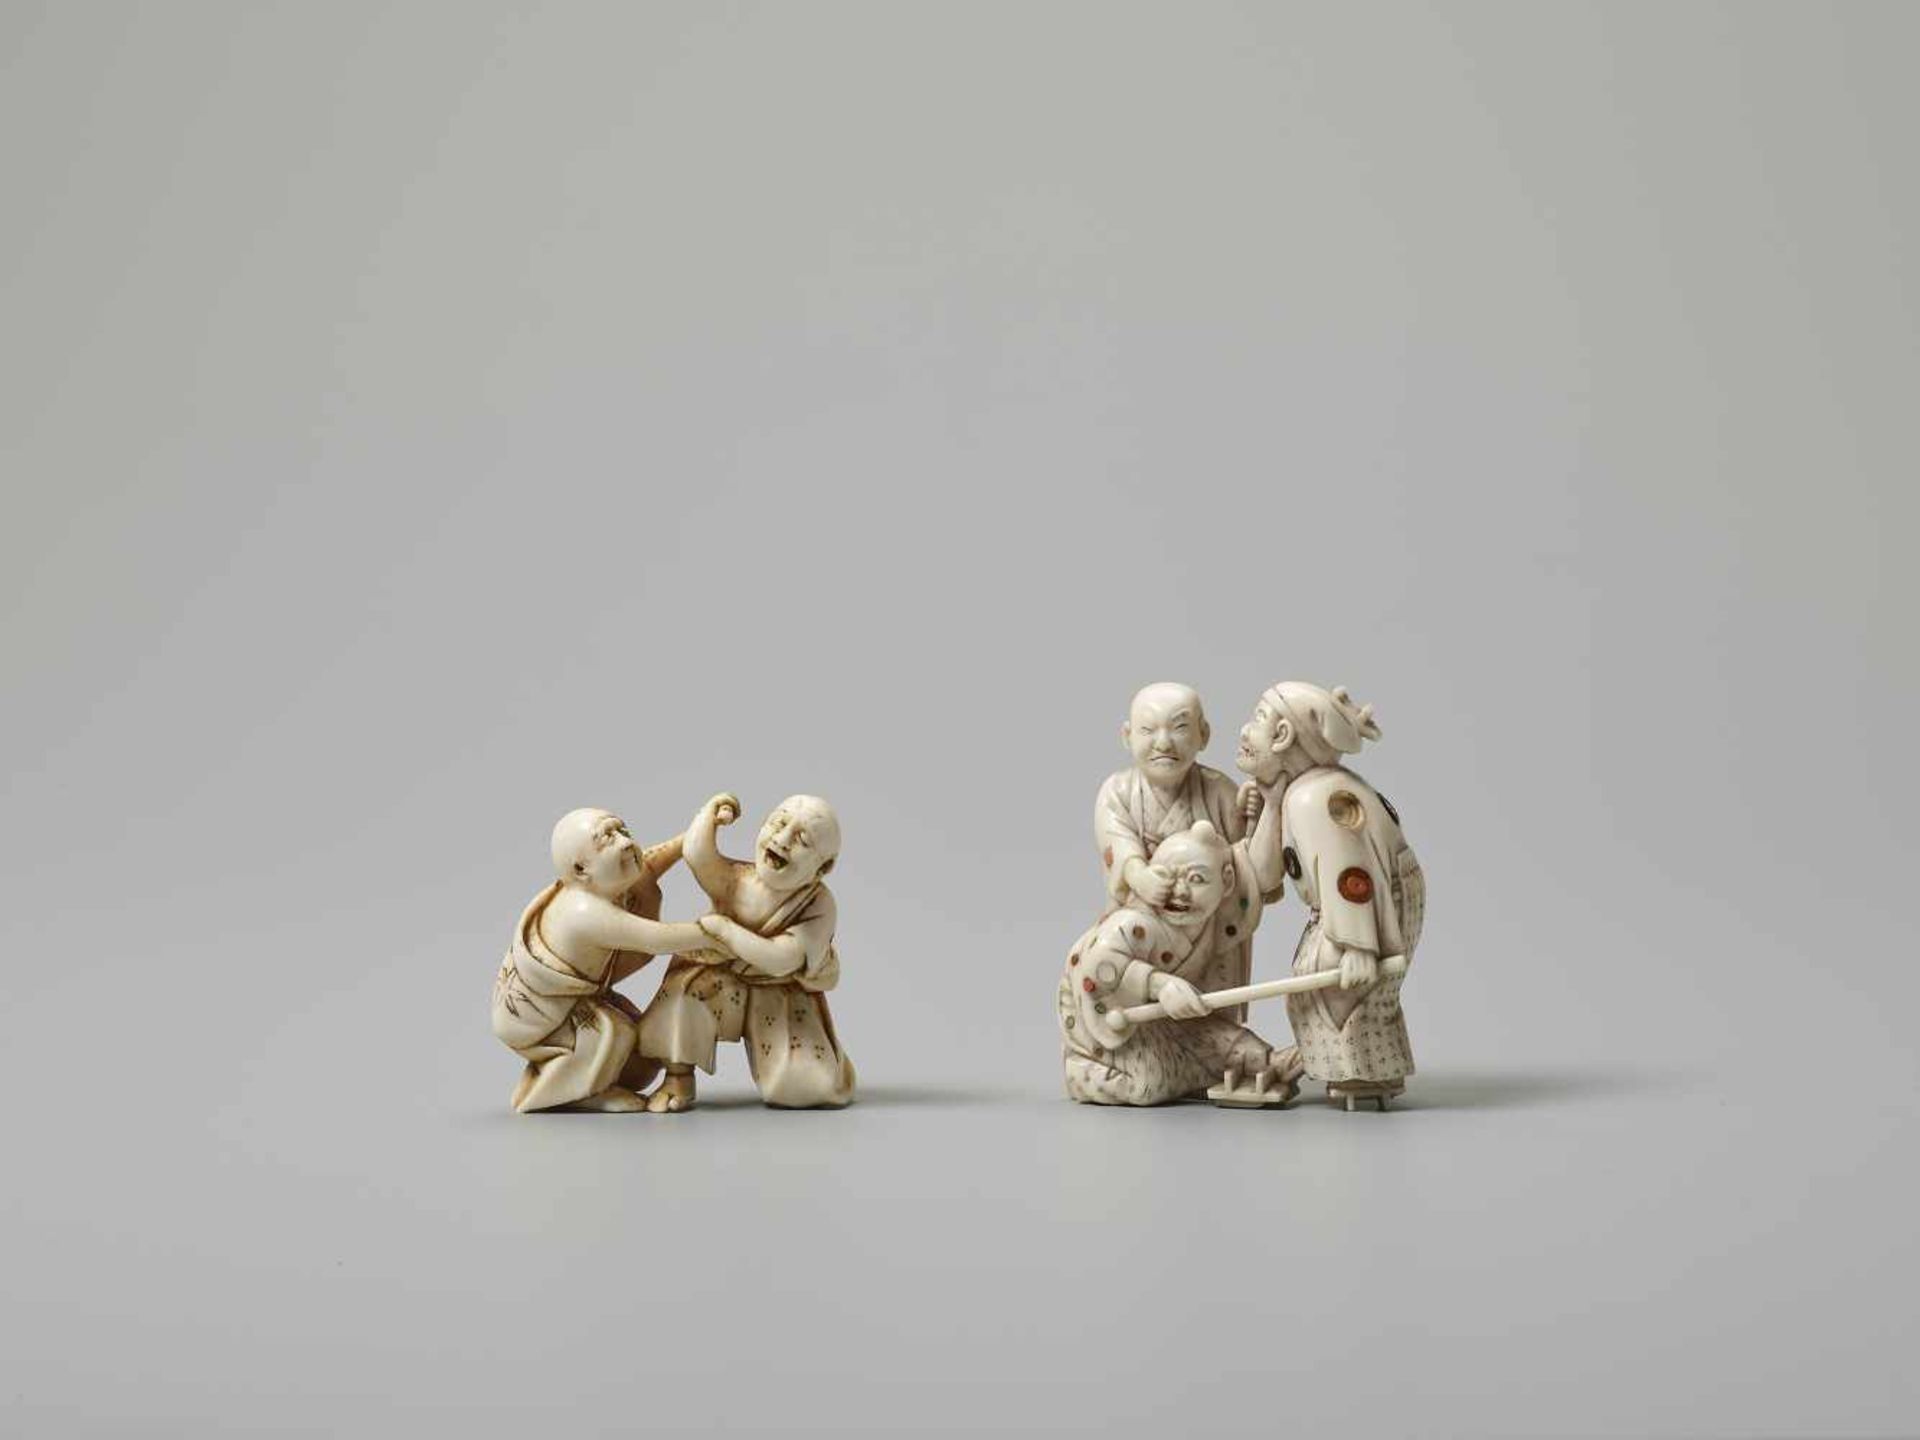 TWO IVORY NETSUKE OF BLIND MEN FIGHTING Unsigned, one with inlaysJapan, Meiji period (1868-1912)